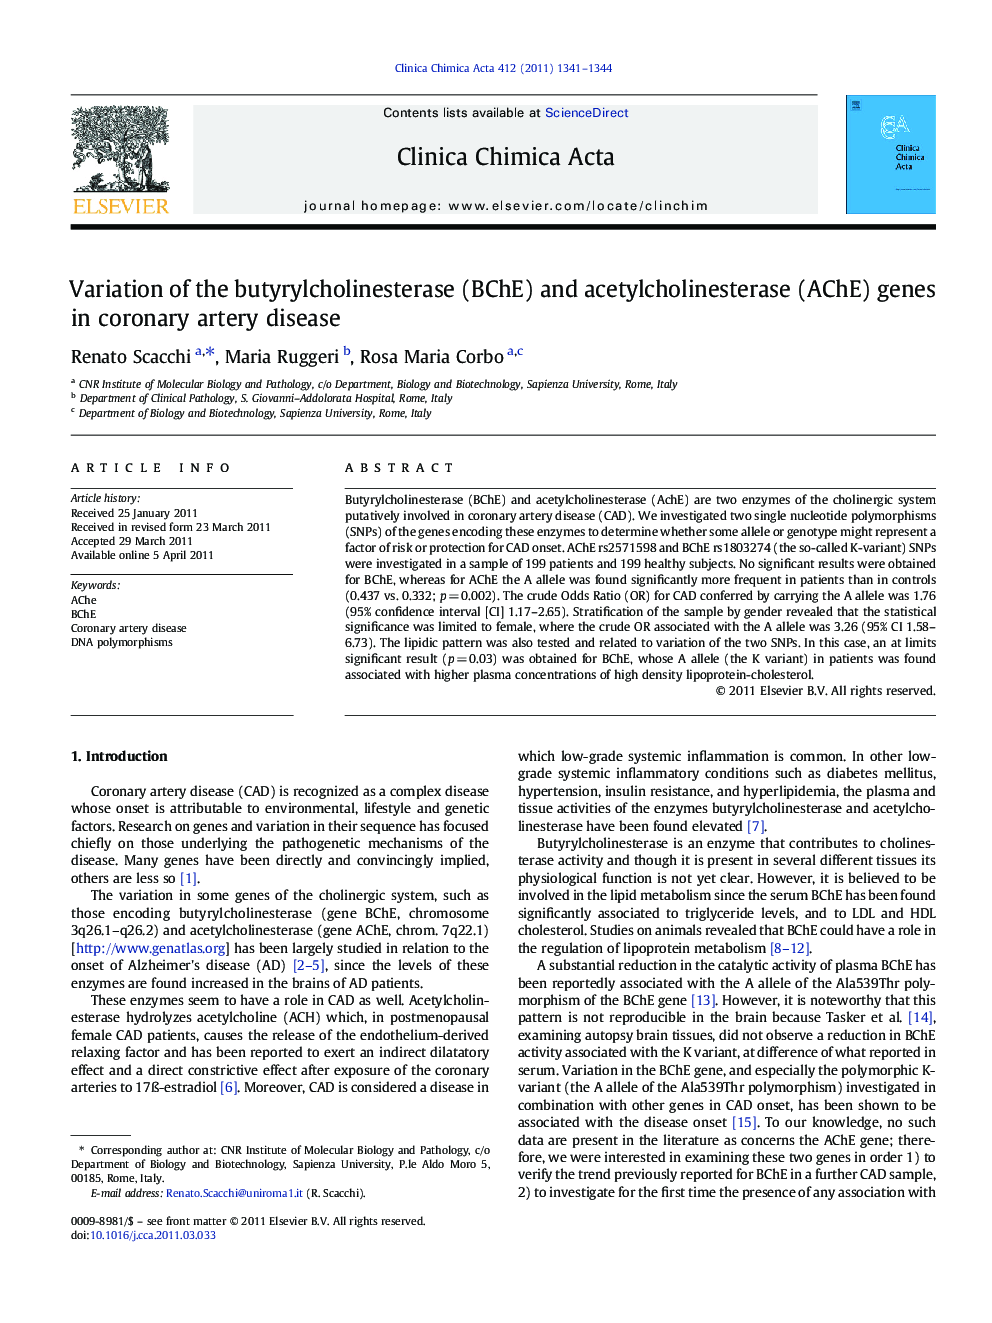 Variation of the butyrylcholinesterase (BChE) and acetylcholinesterase (AChE) genes in coronary artery disease